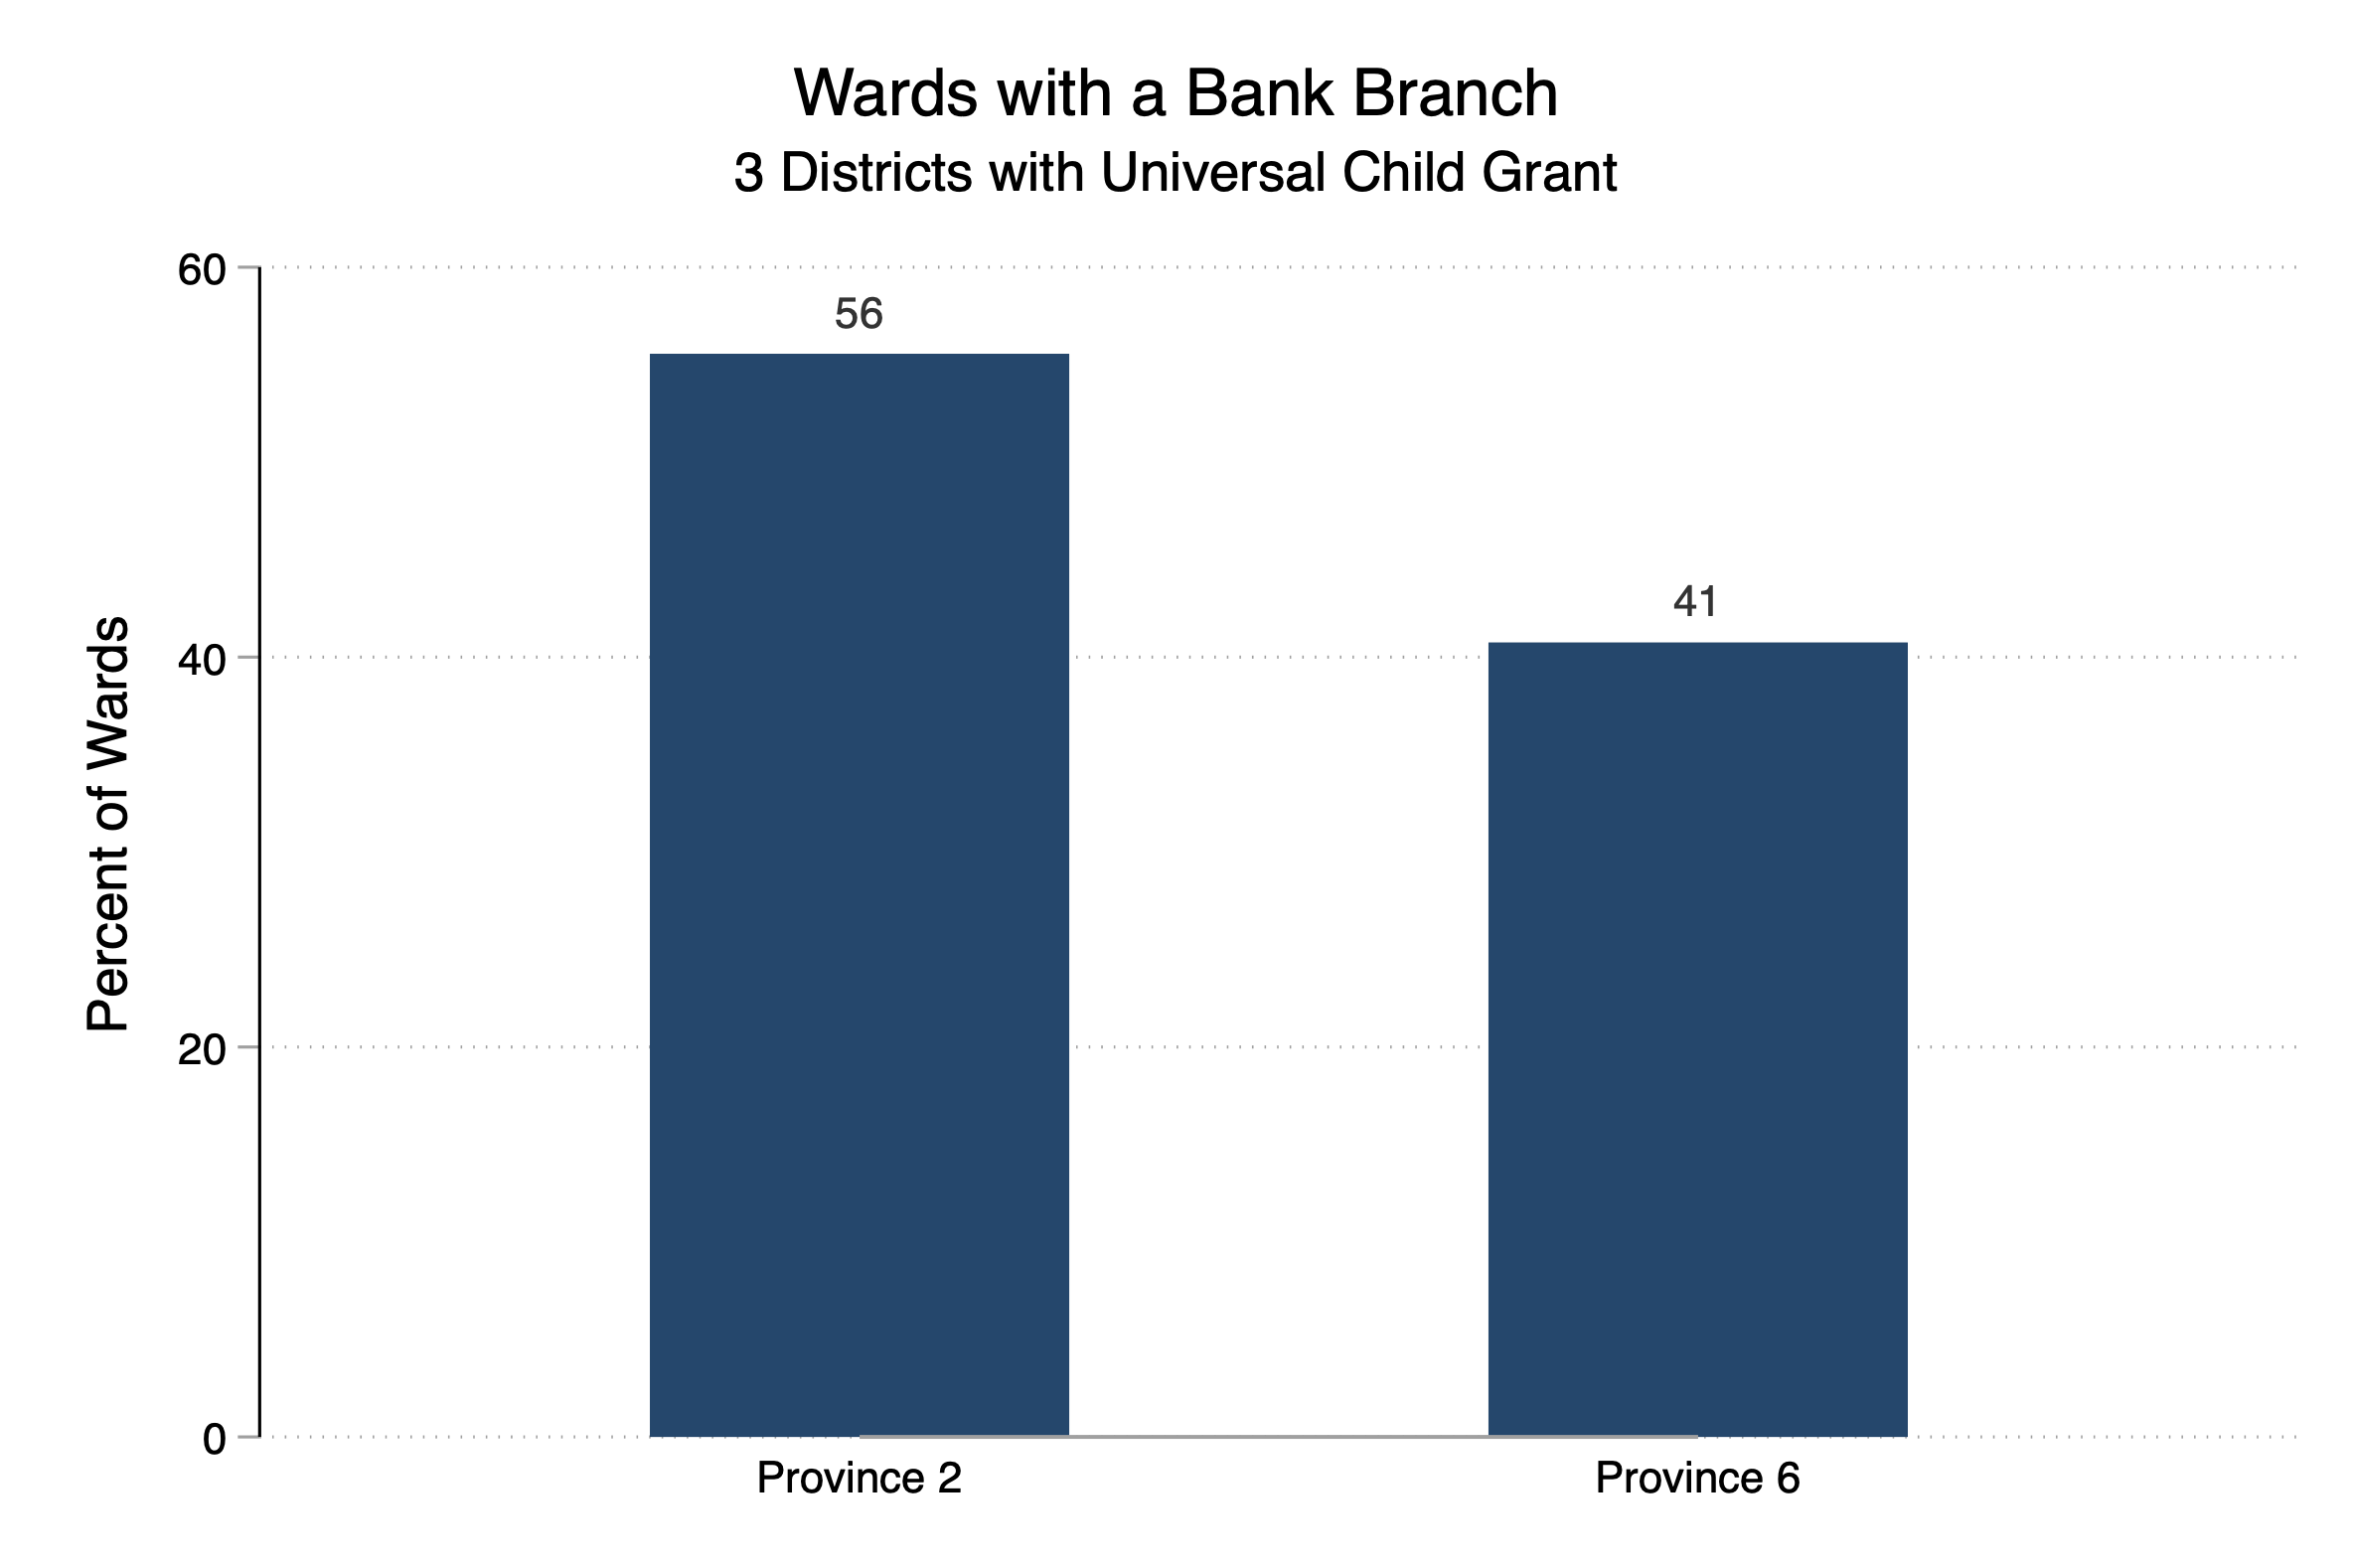 Bar graph of wards with a bank branch